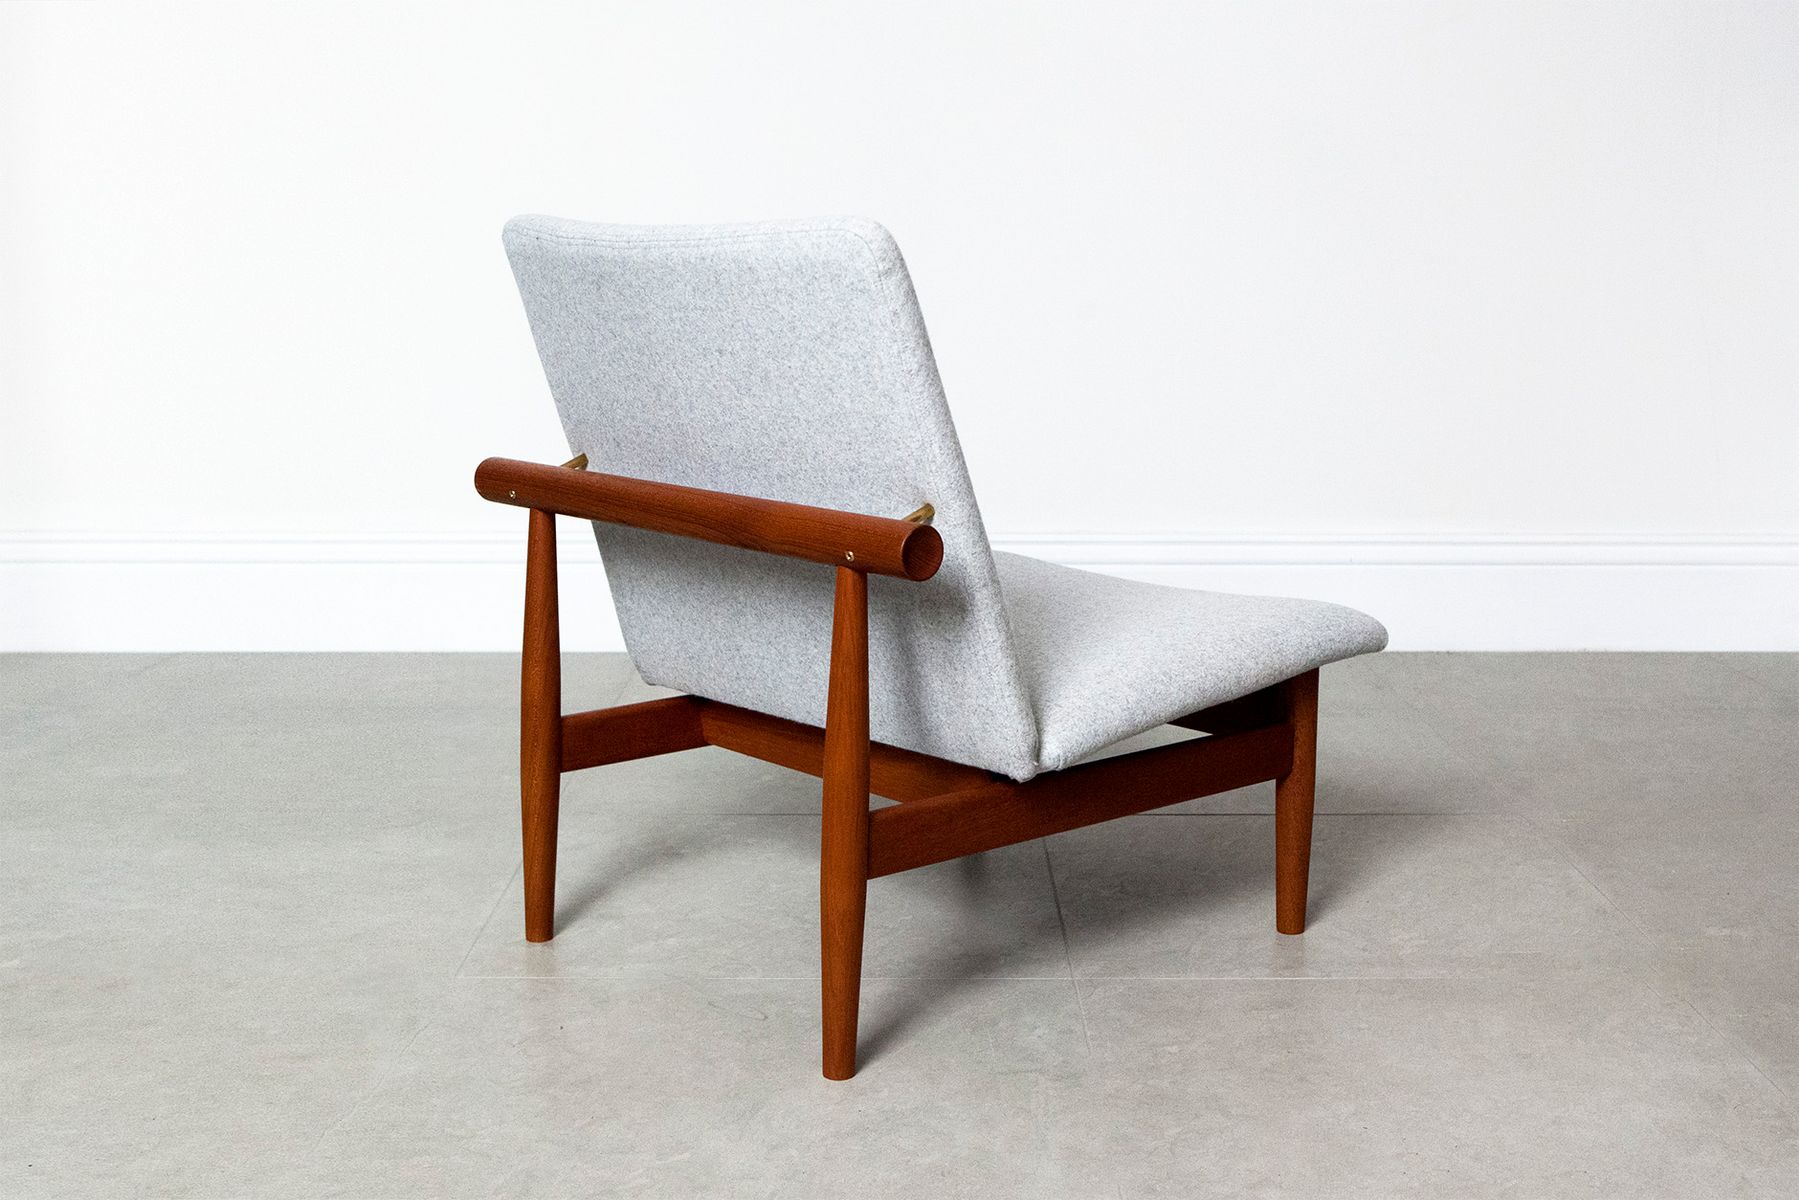 Japan Chair by Finn Juhl for France & Son, 1950s for sale at Pamono